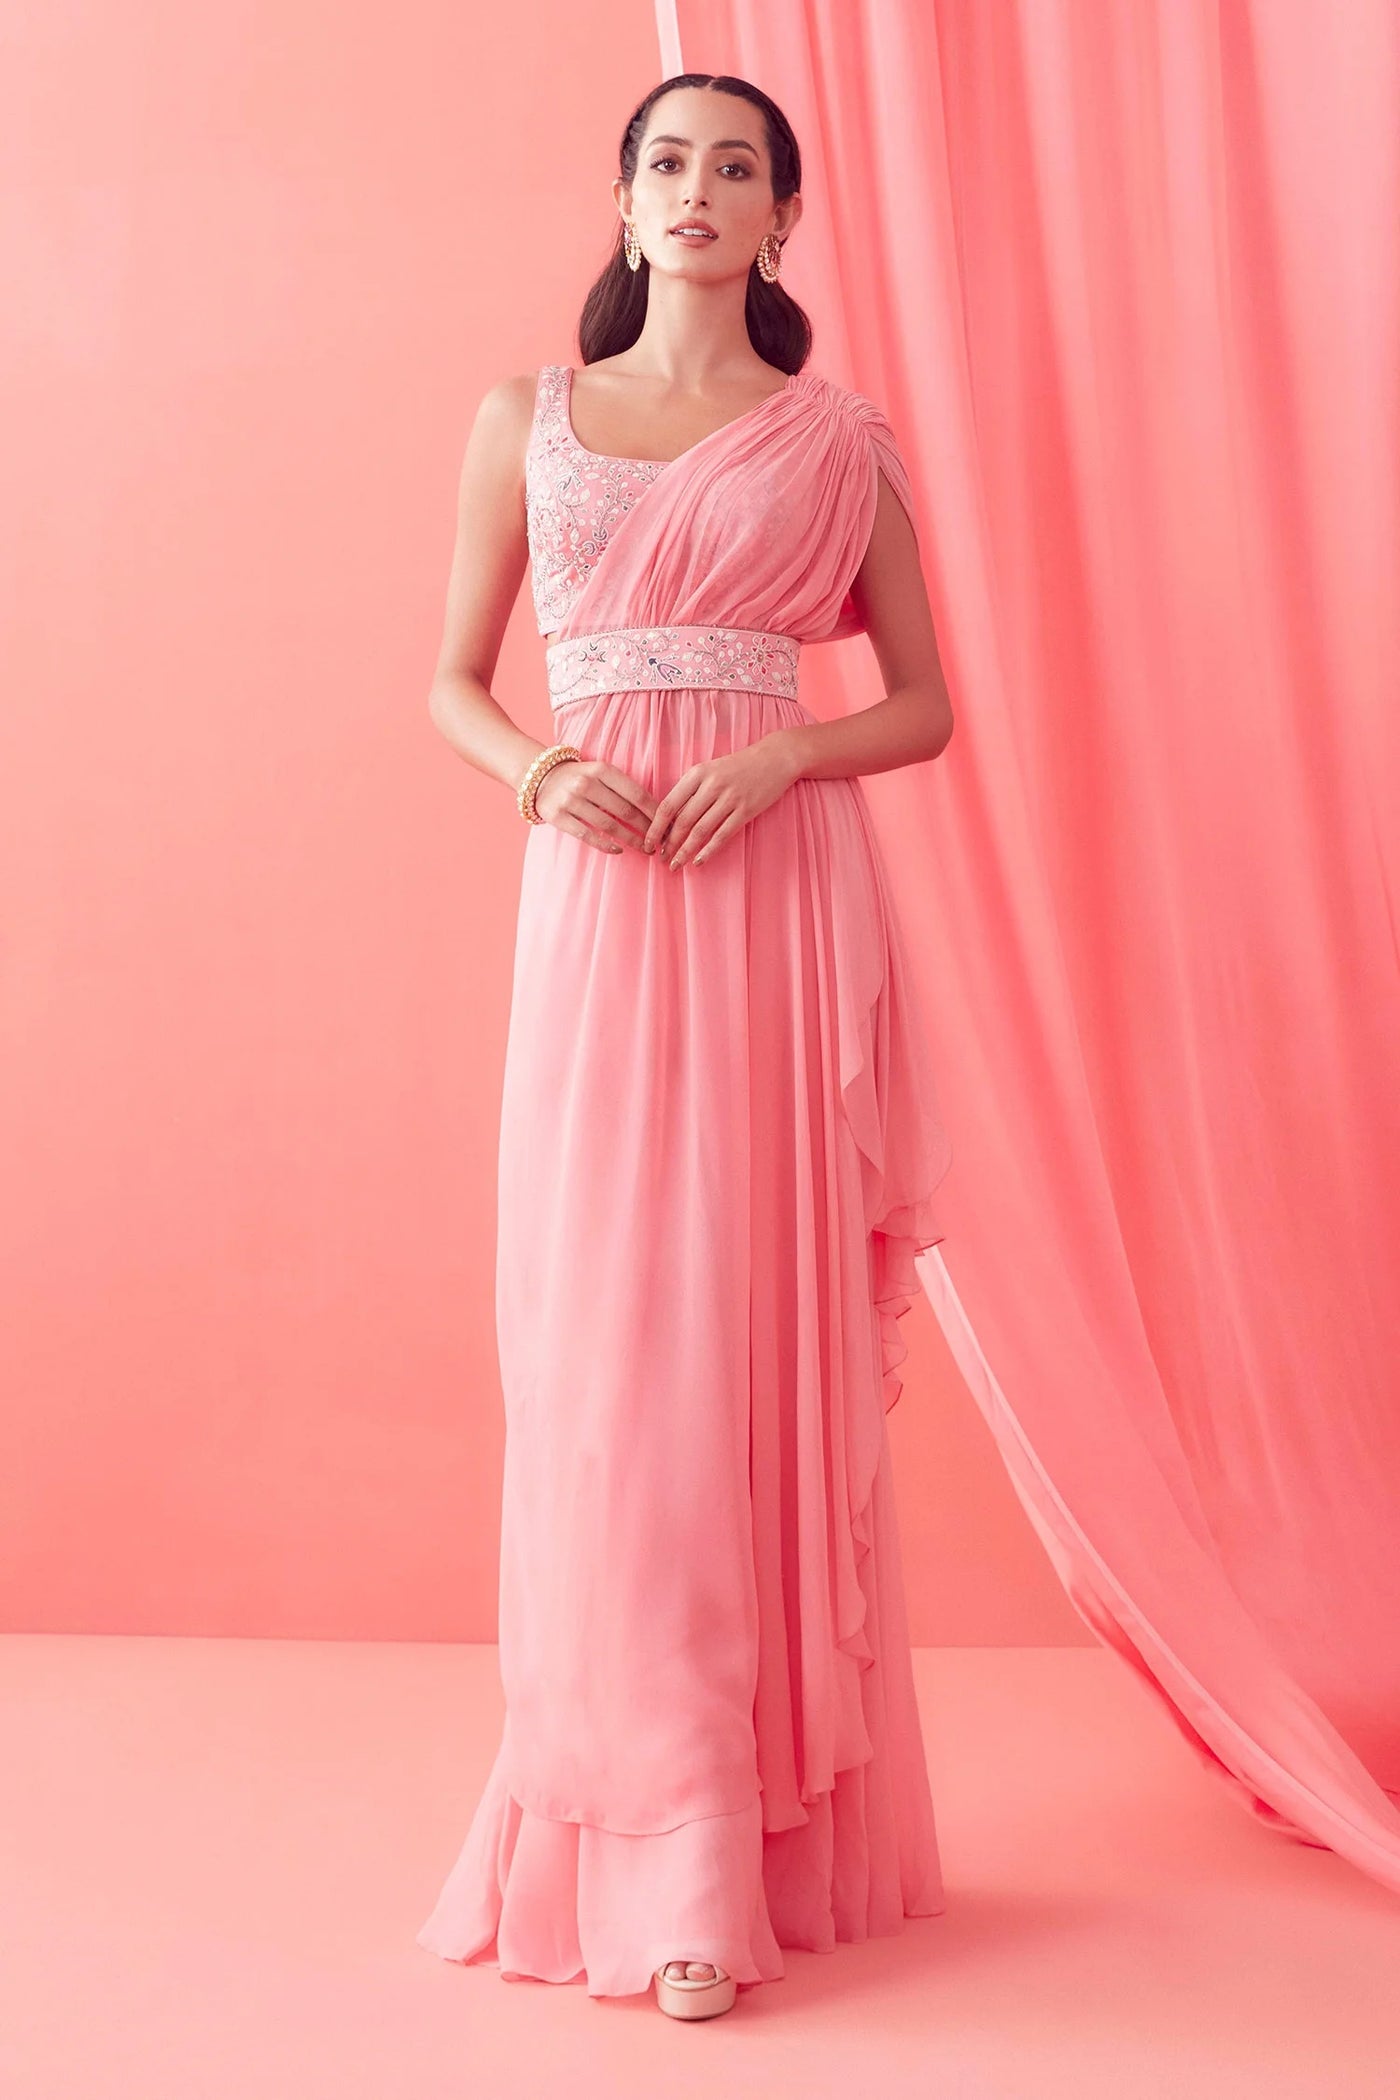 Soft Pink Pre-draped Saree - Indian Clothing in Denver, CO, Aurora, CO, Boulder, CO, Fort Collins, CO, Colorado Springs, CO, Parker, CO, Highlands Ranch, CO, Cherry Creek, CO, Centennial, CO, and Longmont, CO. Nationwide shipping USA - India Fashion X